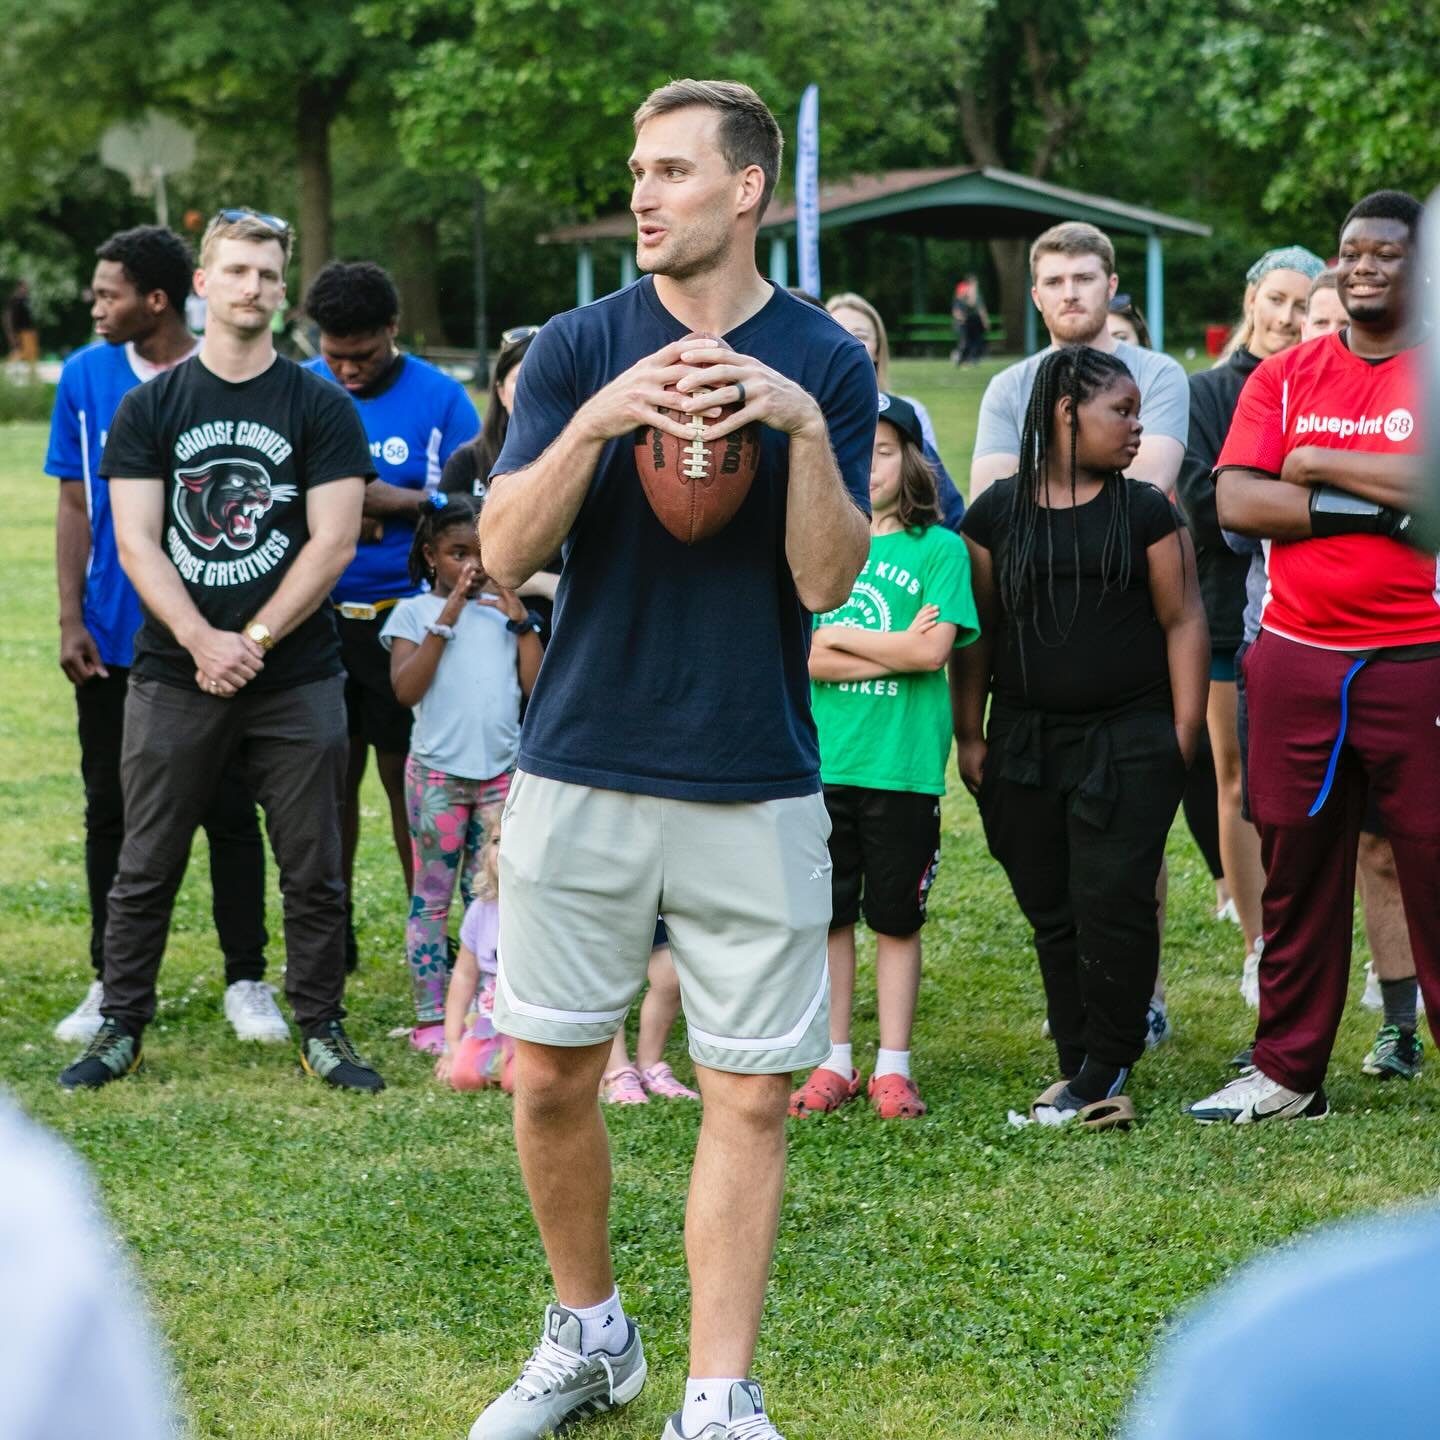 Pretty epic week at flag football tonight! Grateful for our friend @dannywuerffel who always supports and champions @blueprint58atl. BIG thank you to @kirkcousins of @atlantafalcons for showing up, throwing passes to kids, signing stinky cleats and t